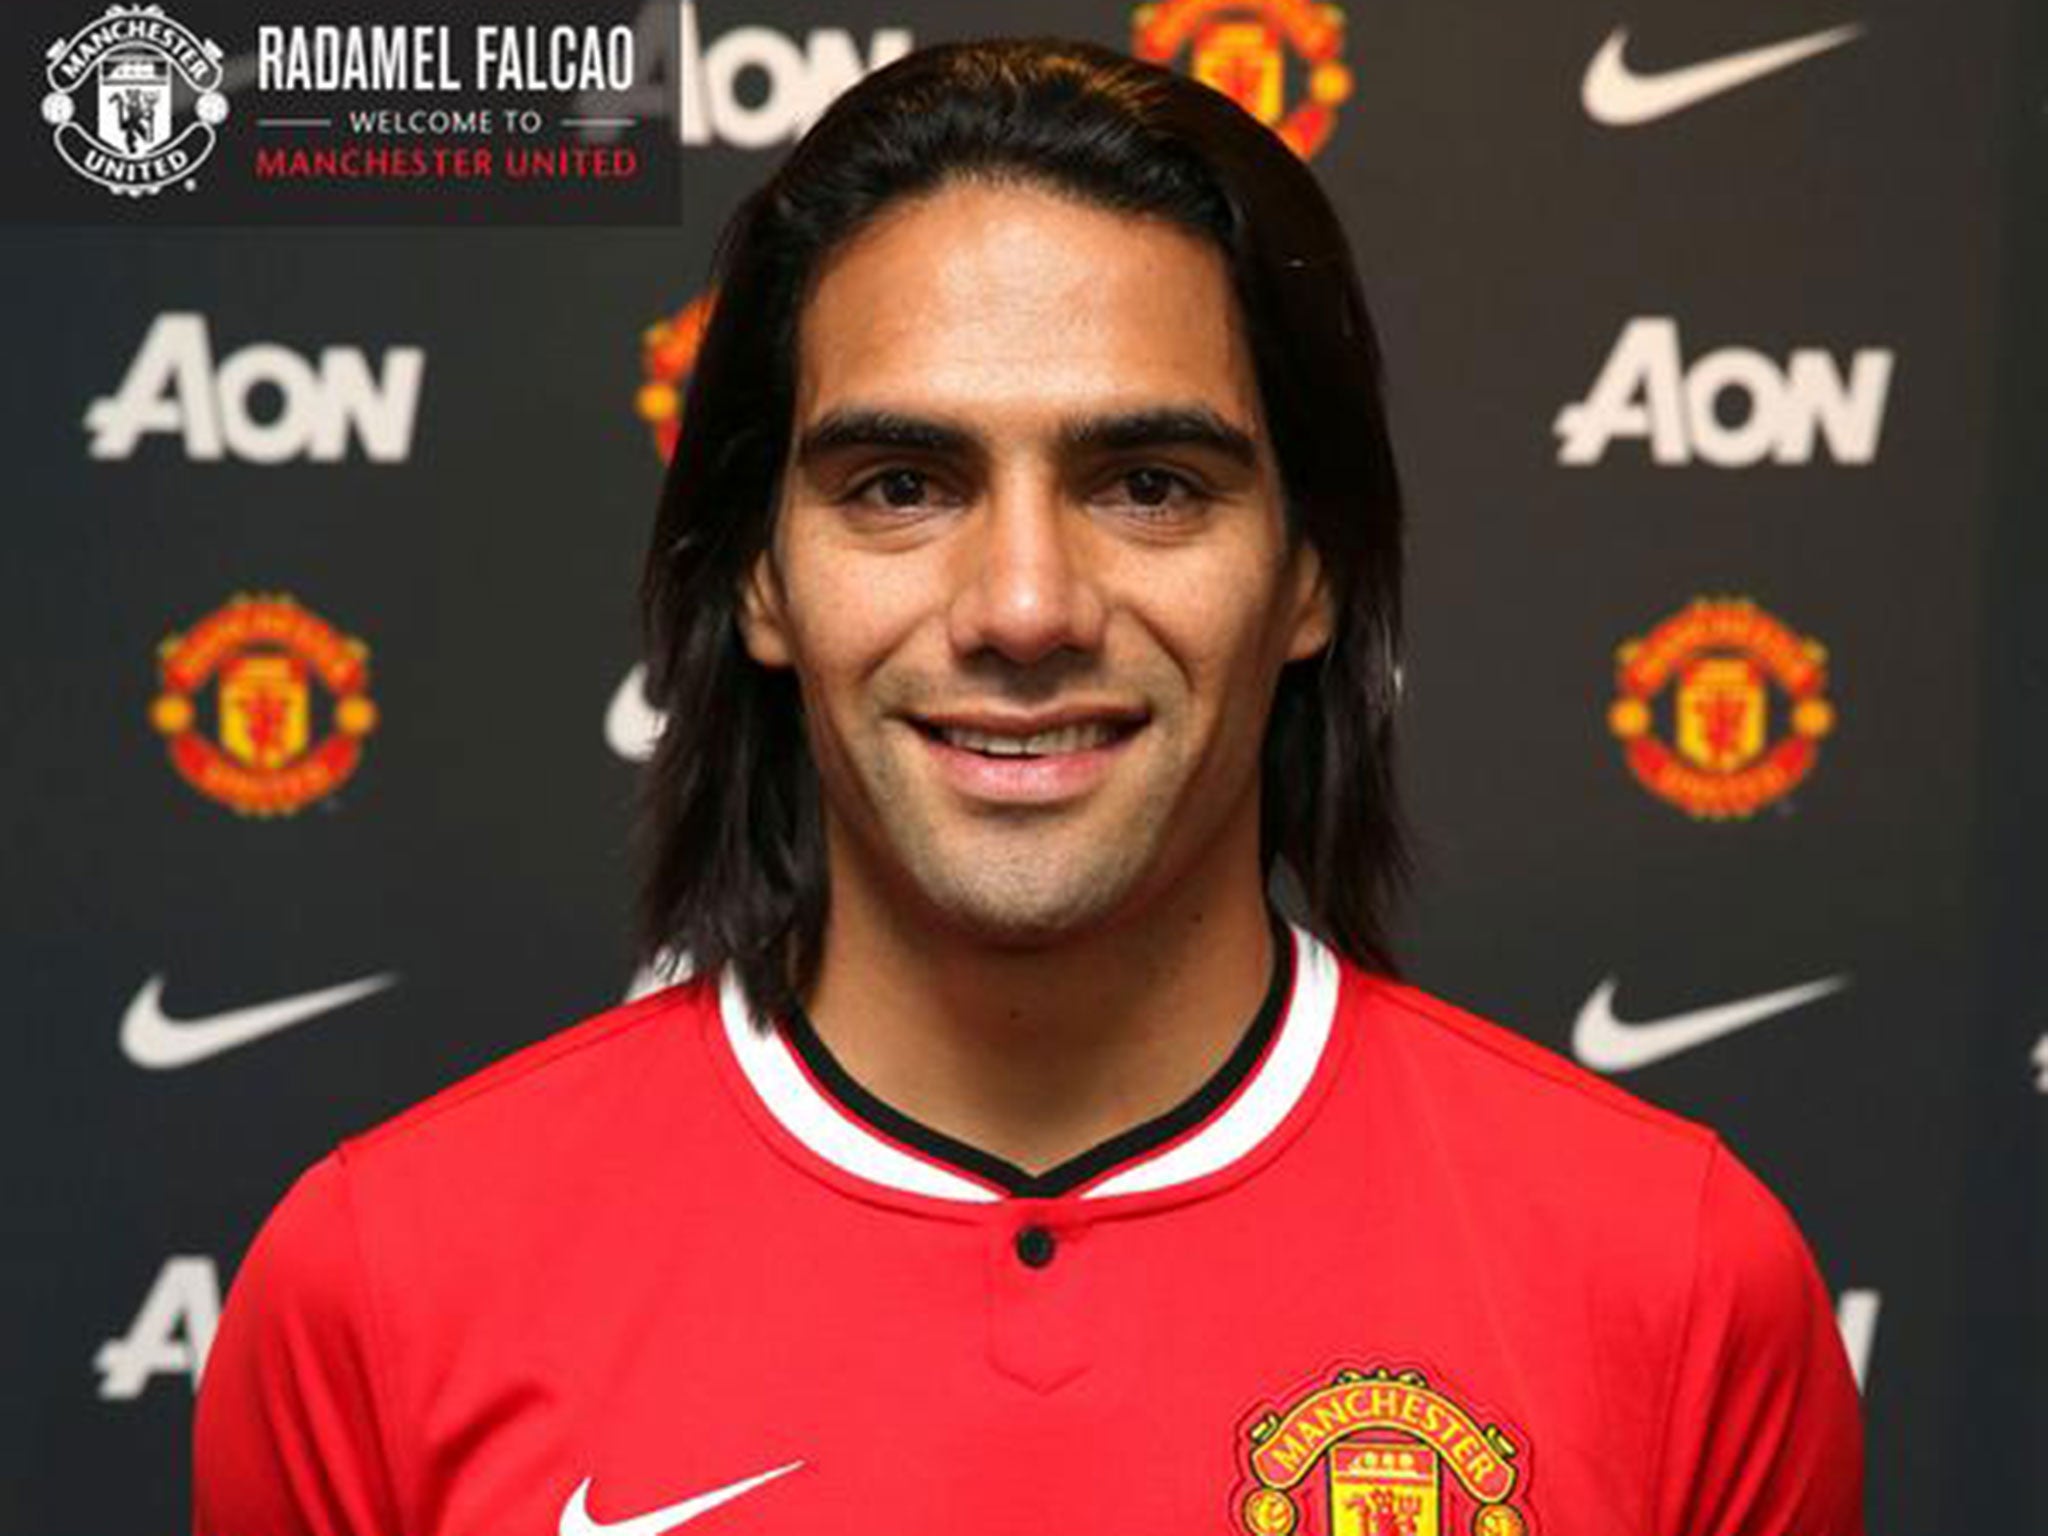 Radamel Falcao is presented as a Manchester United player